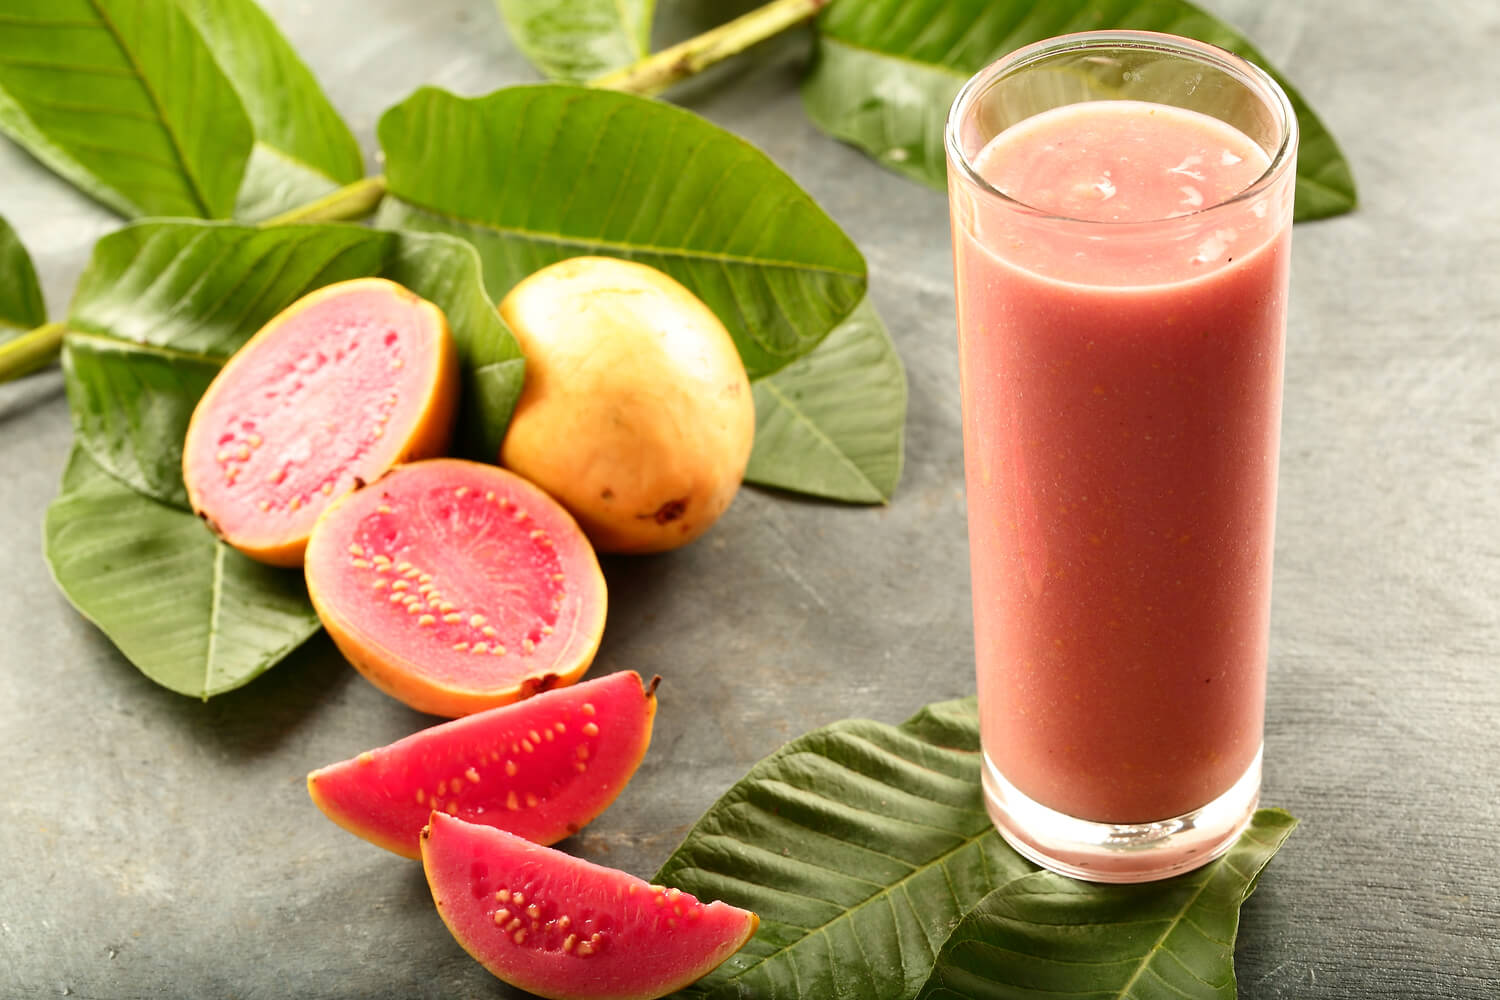 guava juice and guava